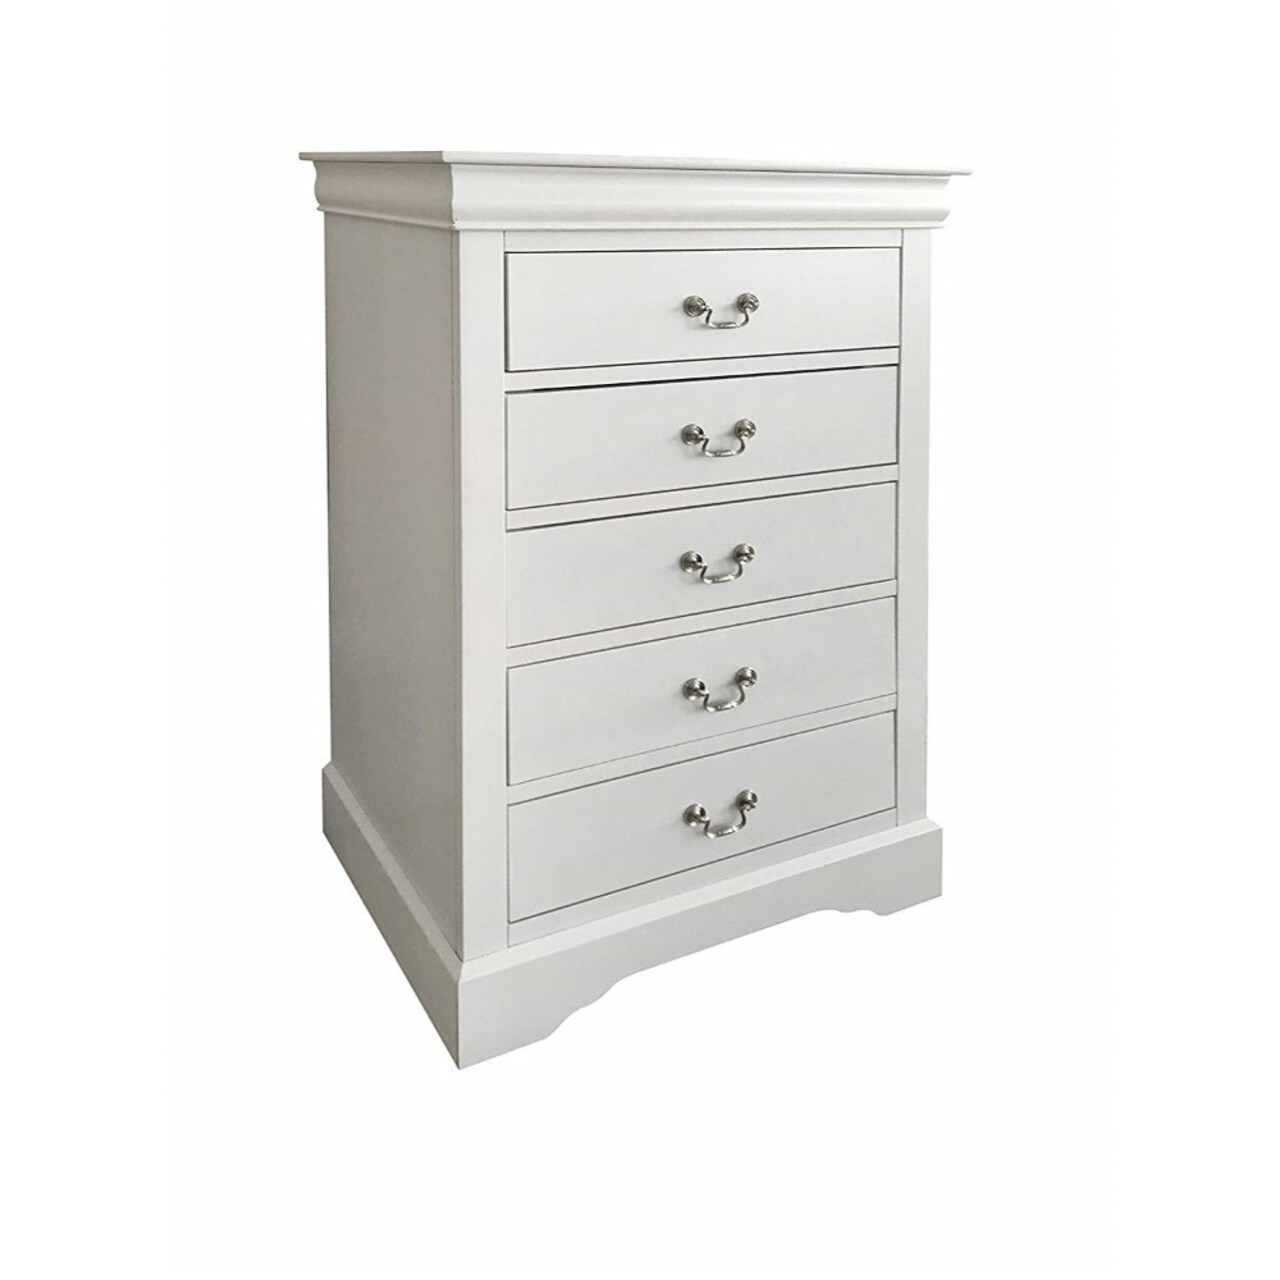 ACME Traditional Style Wood and Metal Chest with 5 Drawers, White- Saltoro Sherpi